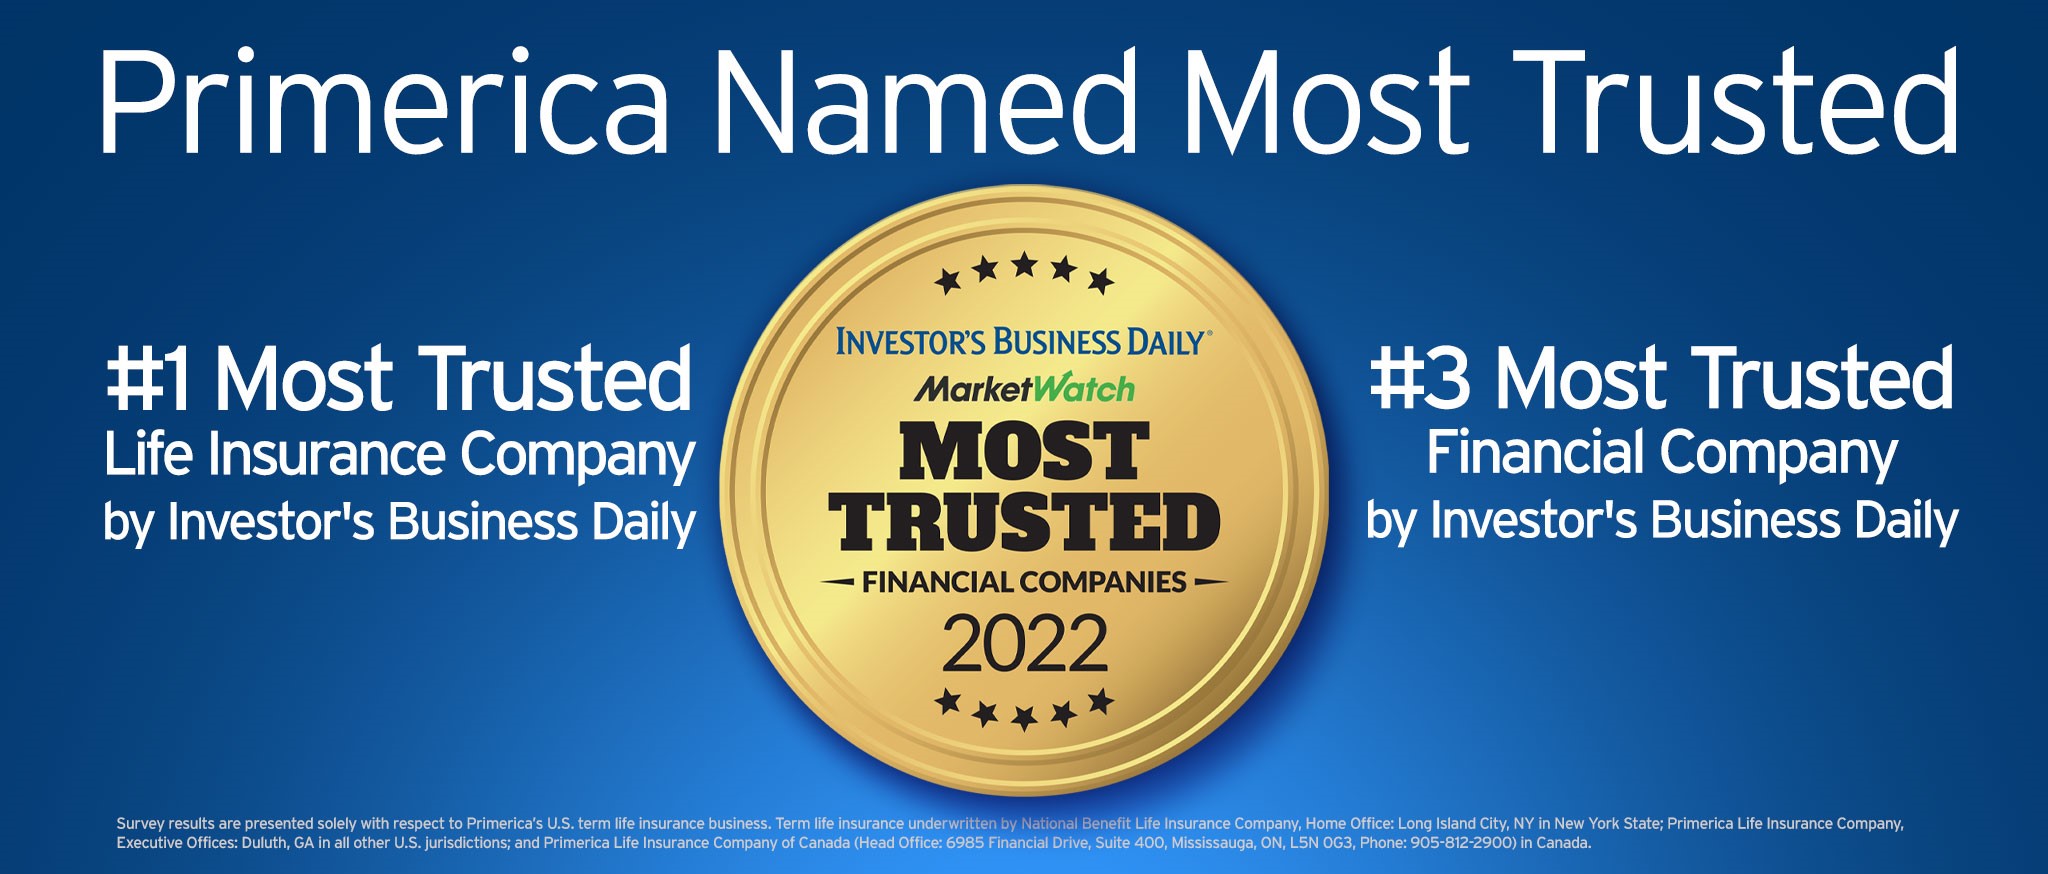 Primerica Named Most Trusted by Investor's Business Daily